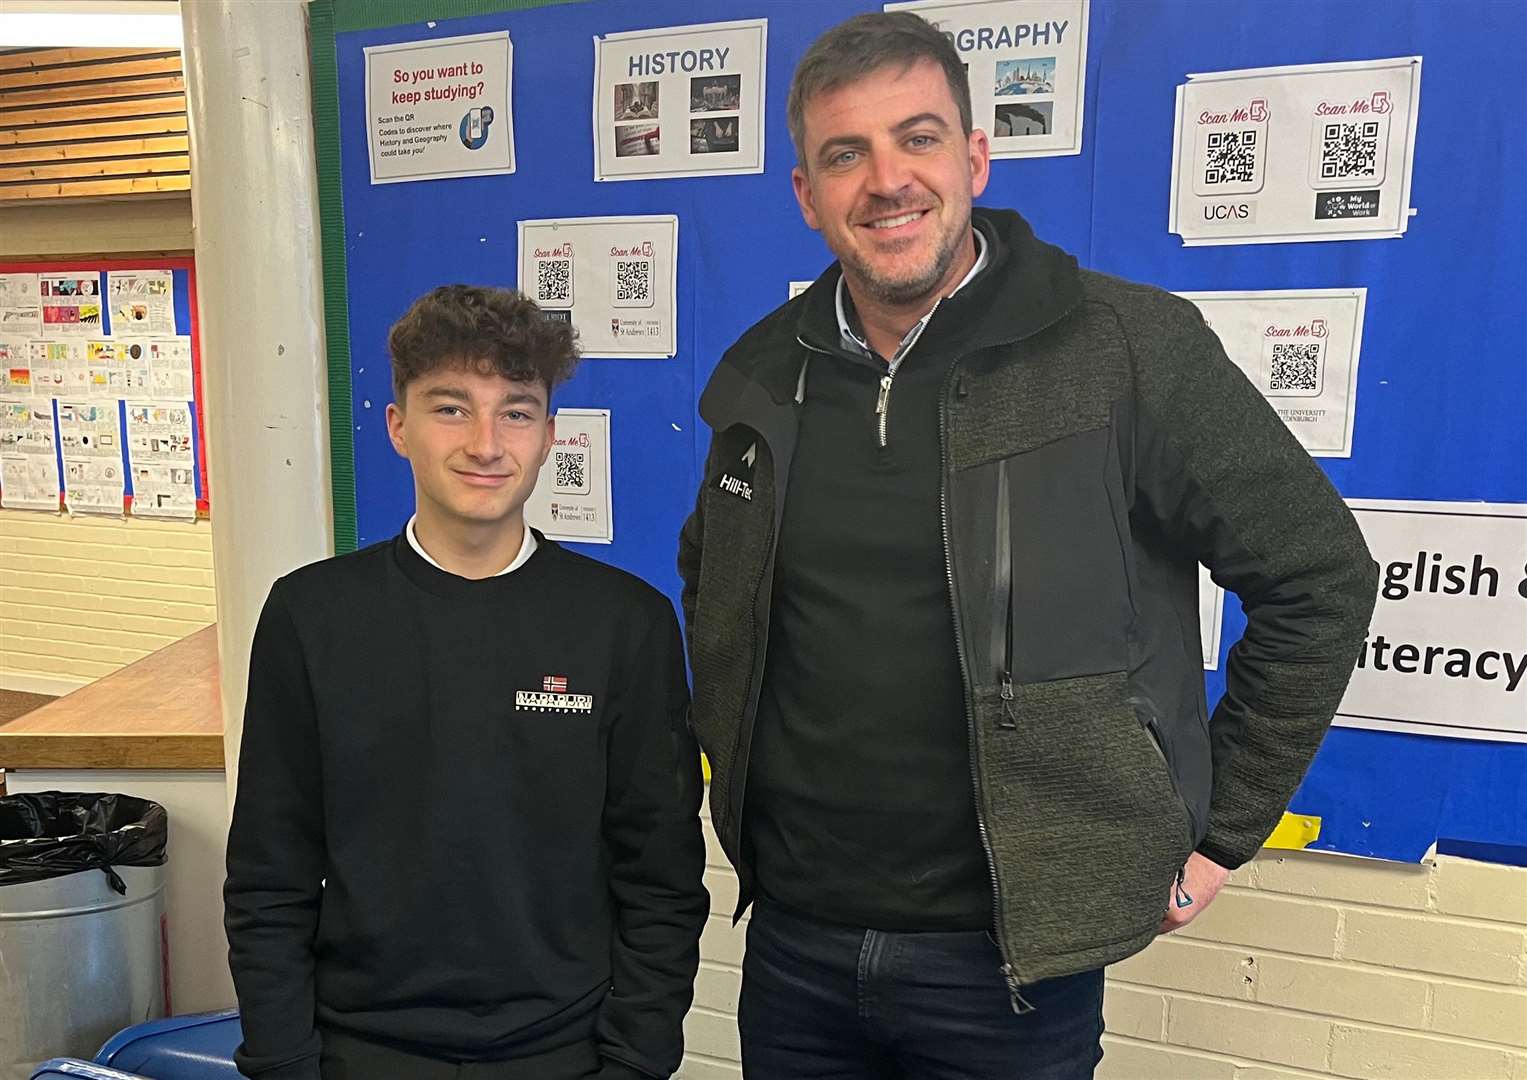 Hill-Tec Ltd’s Duncan MacPherson (right) offered valuable work experience to Konrad Baczkiewicz thanks to a partnership with the Virtual Learning Academy.